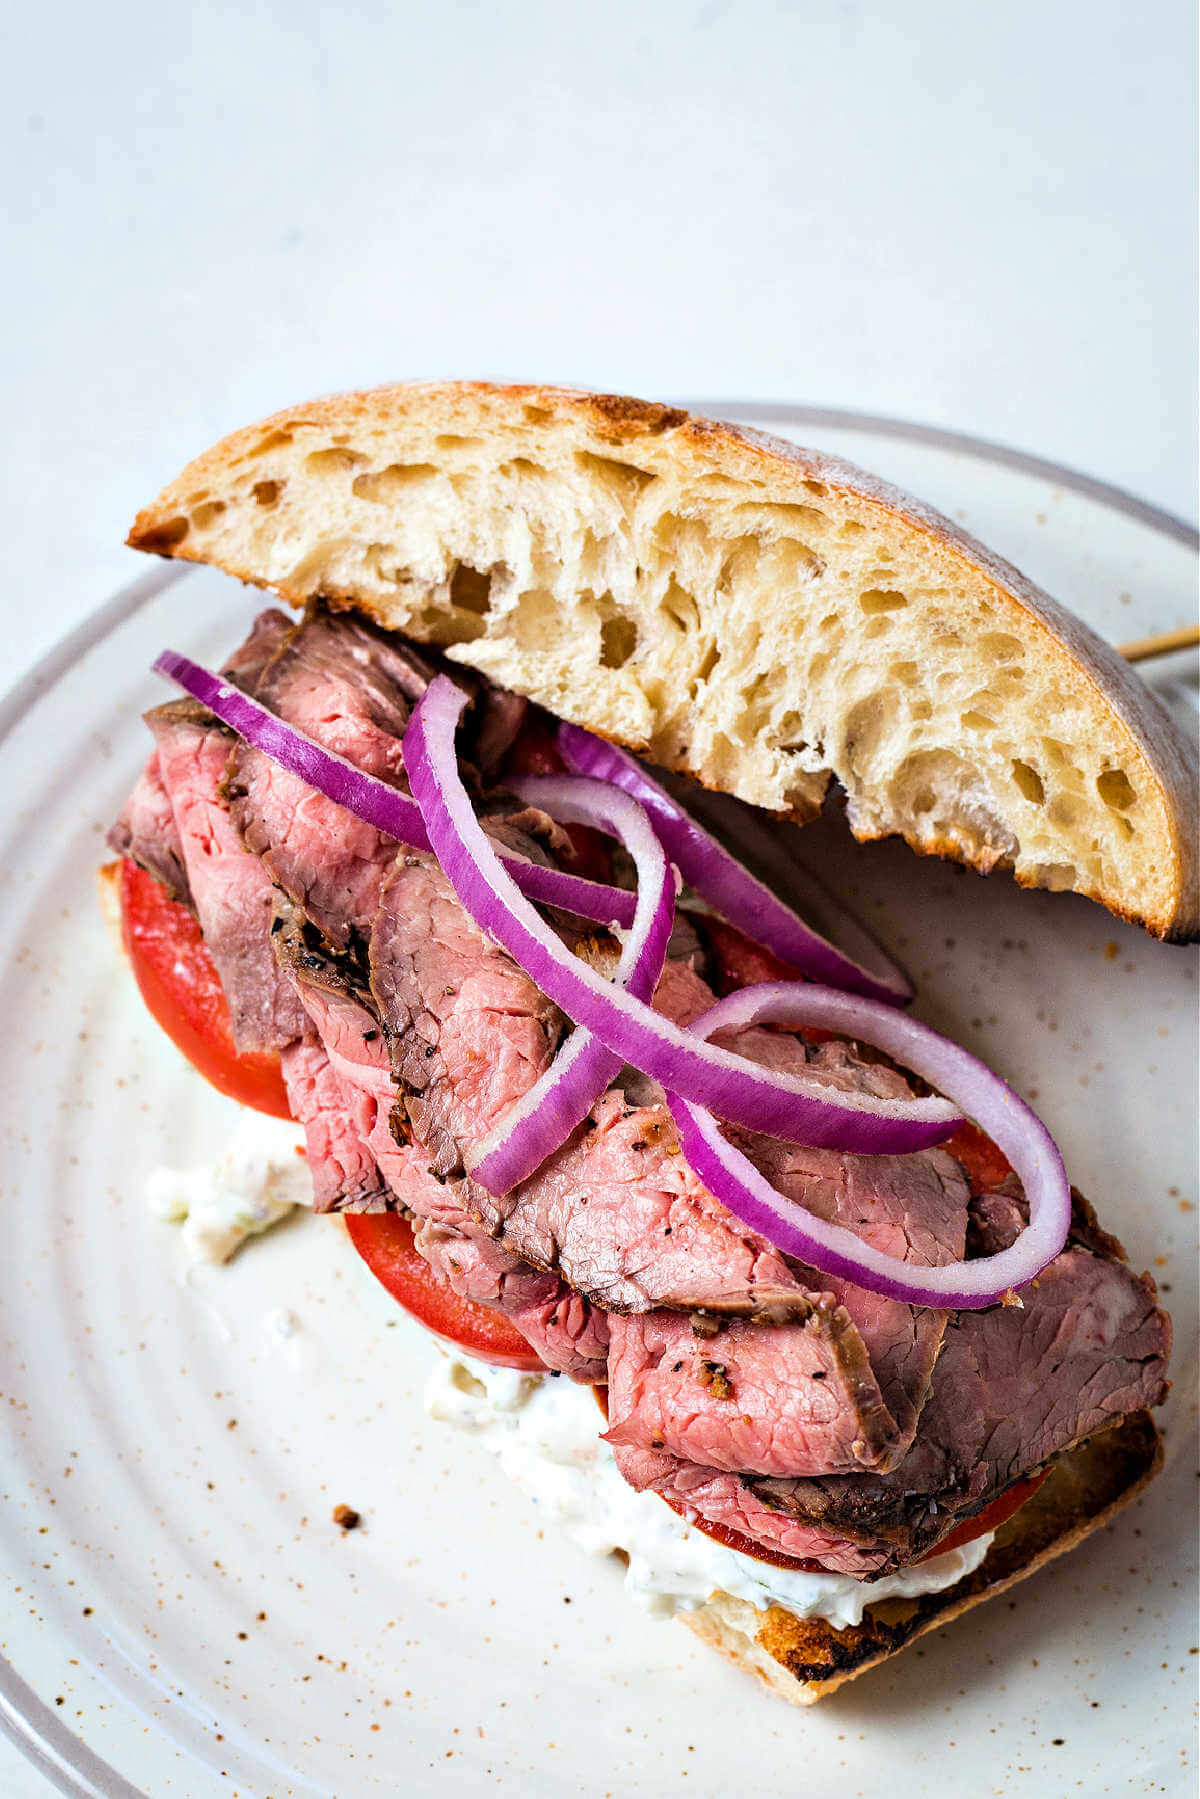 an open face steak sandwich on a ciabatta bun with tomatoes and red onions.